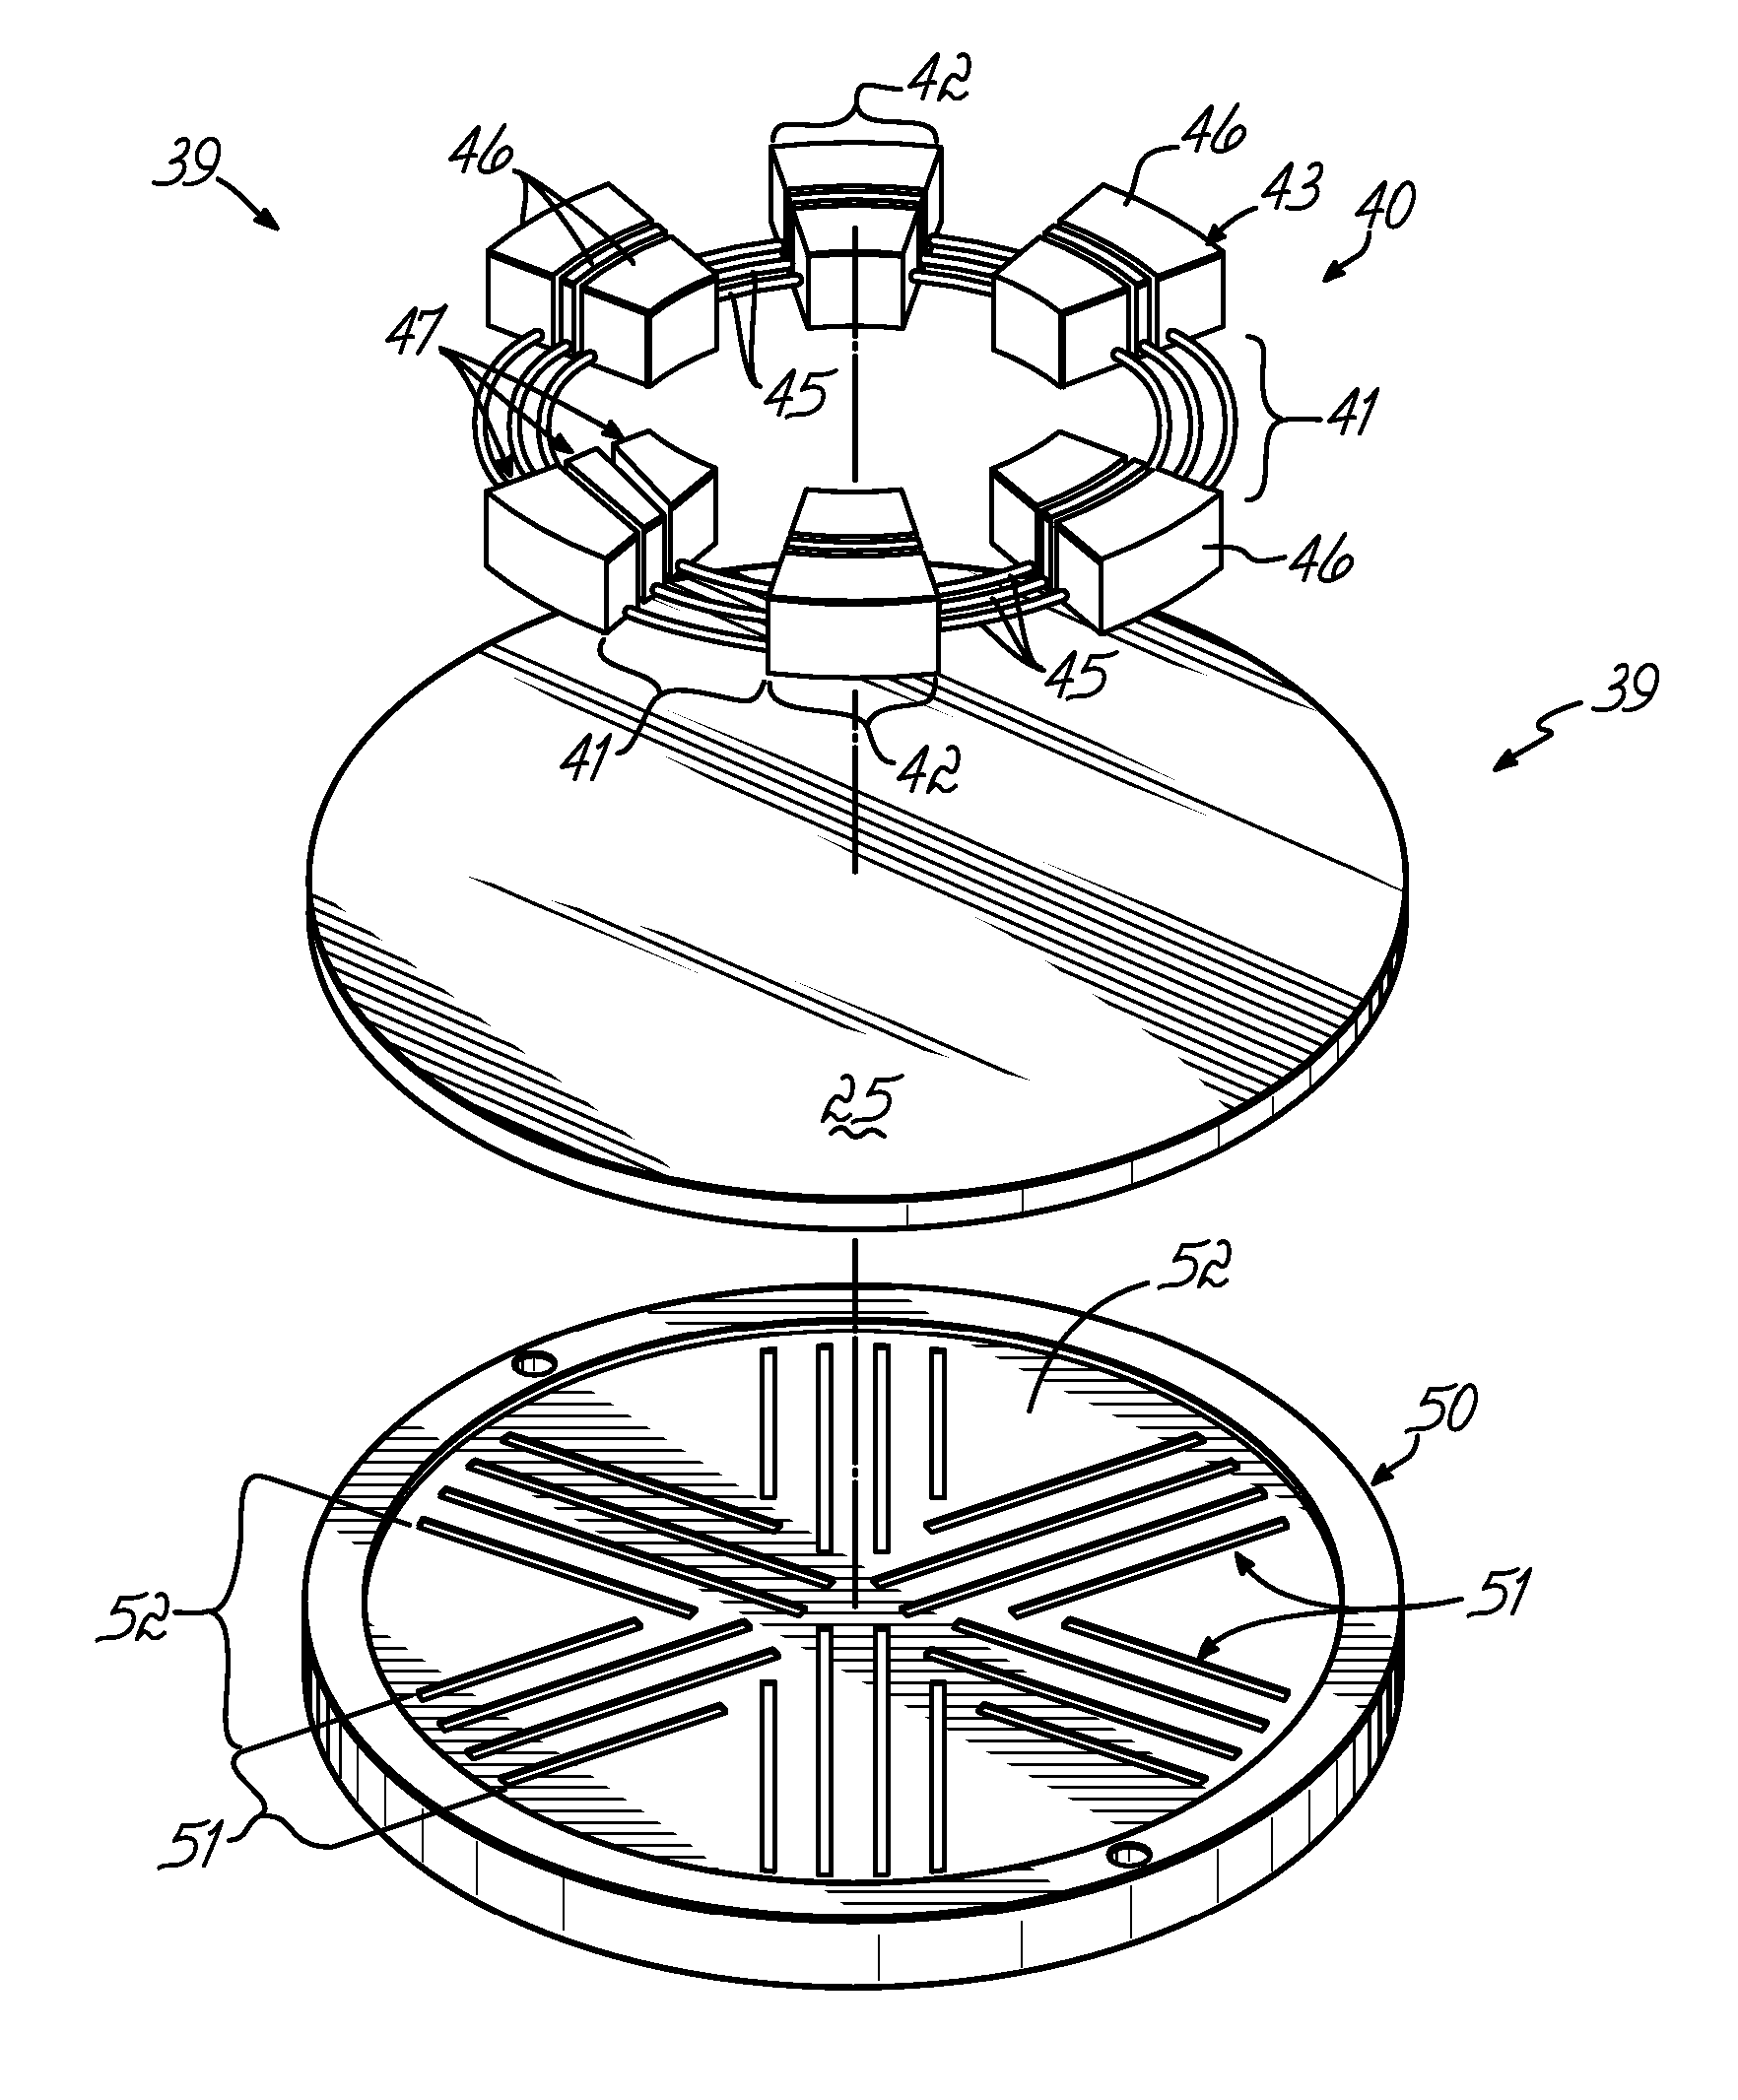 Locally-efficient inductive plasma coupling for plasma processing system